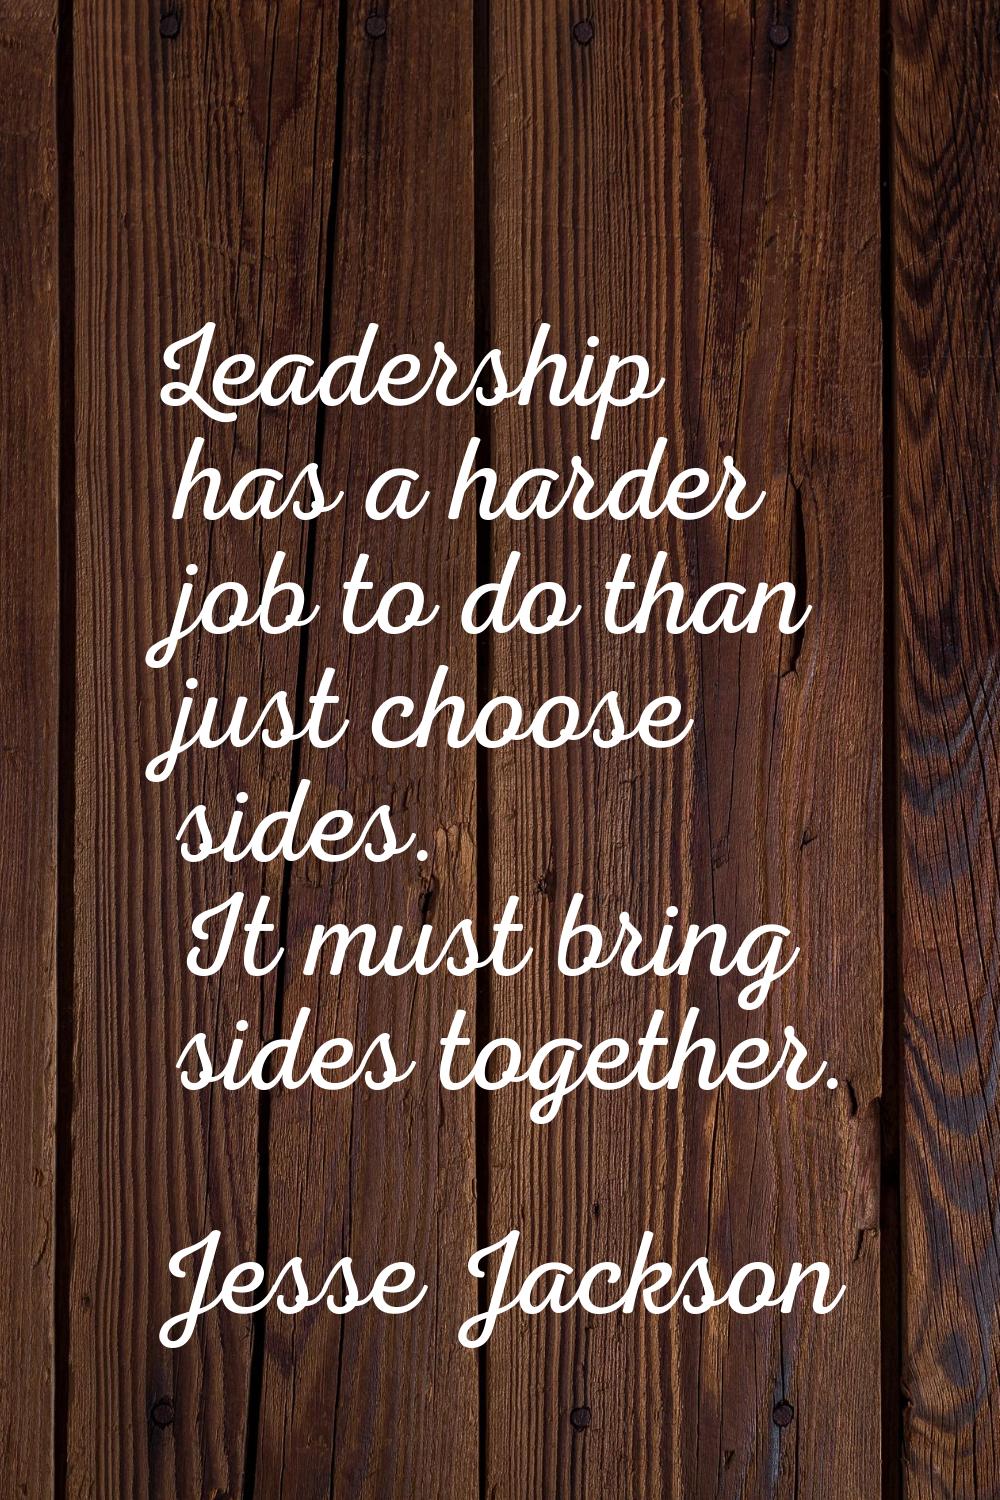 Leadership has a harder job to do than just choose sides. It must bring sides together.